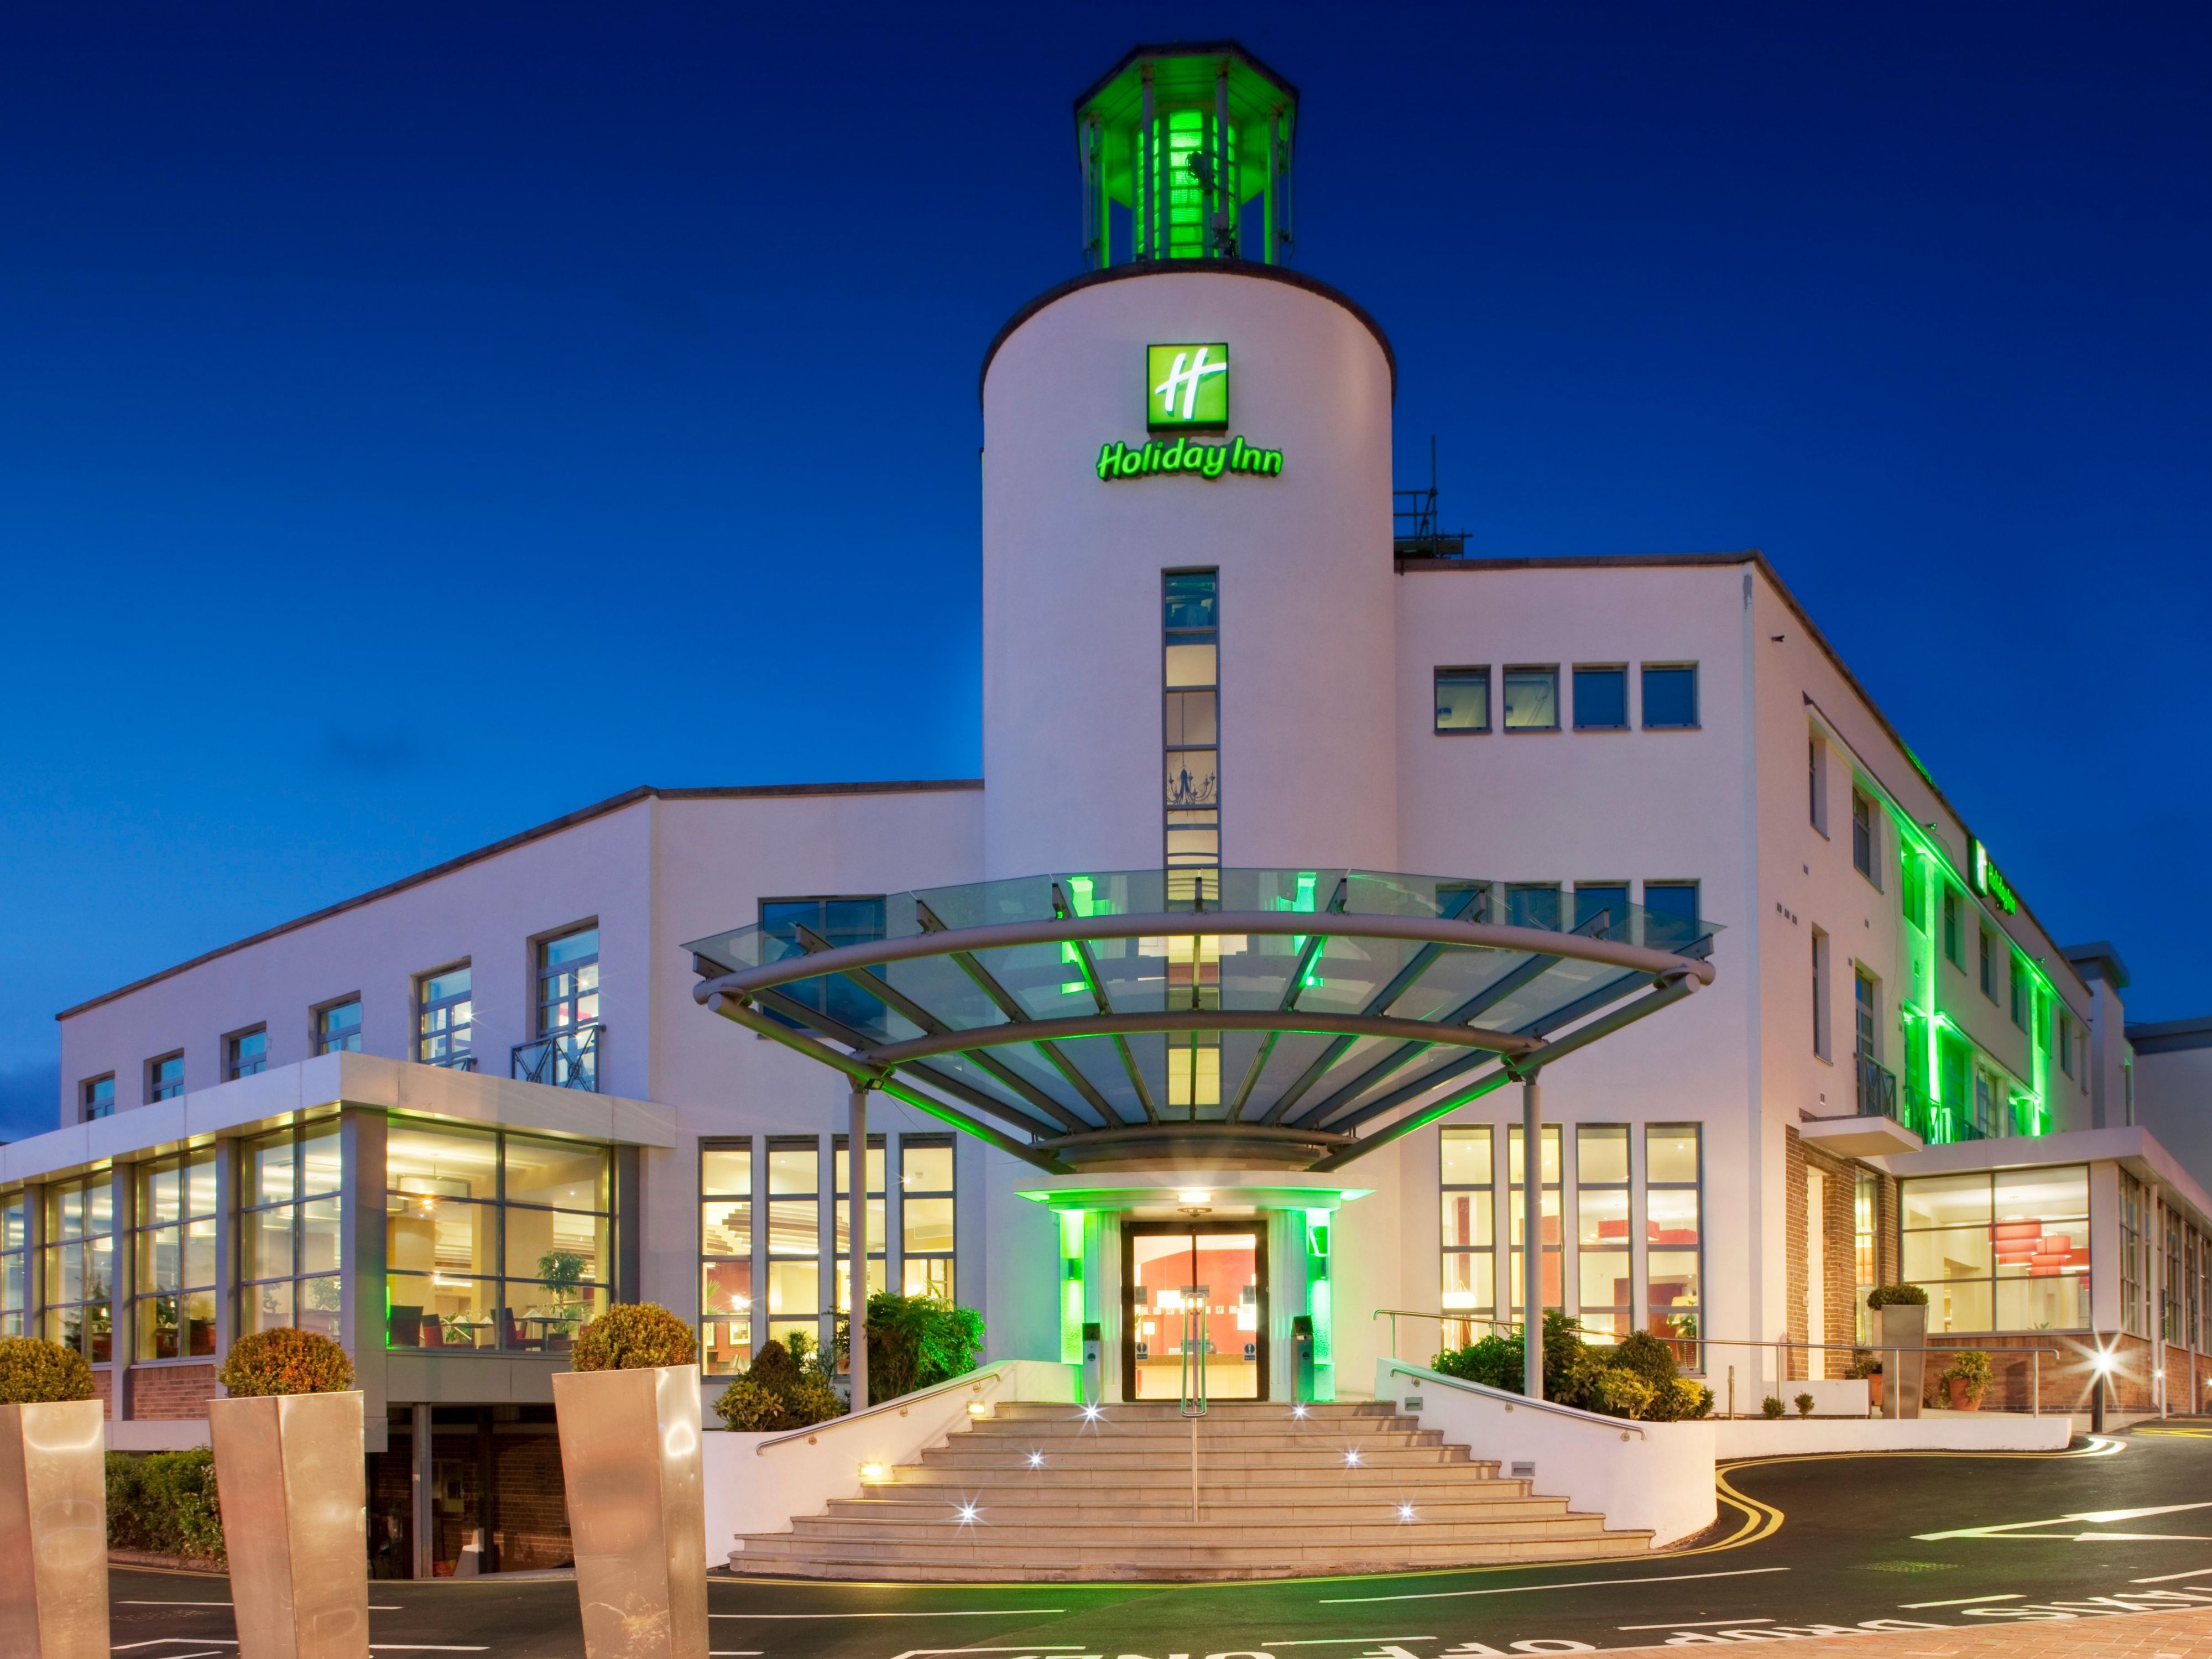 Hotel with park and stay packages - Holiday Inn Birmingham Airport